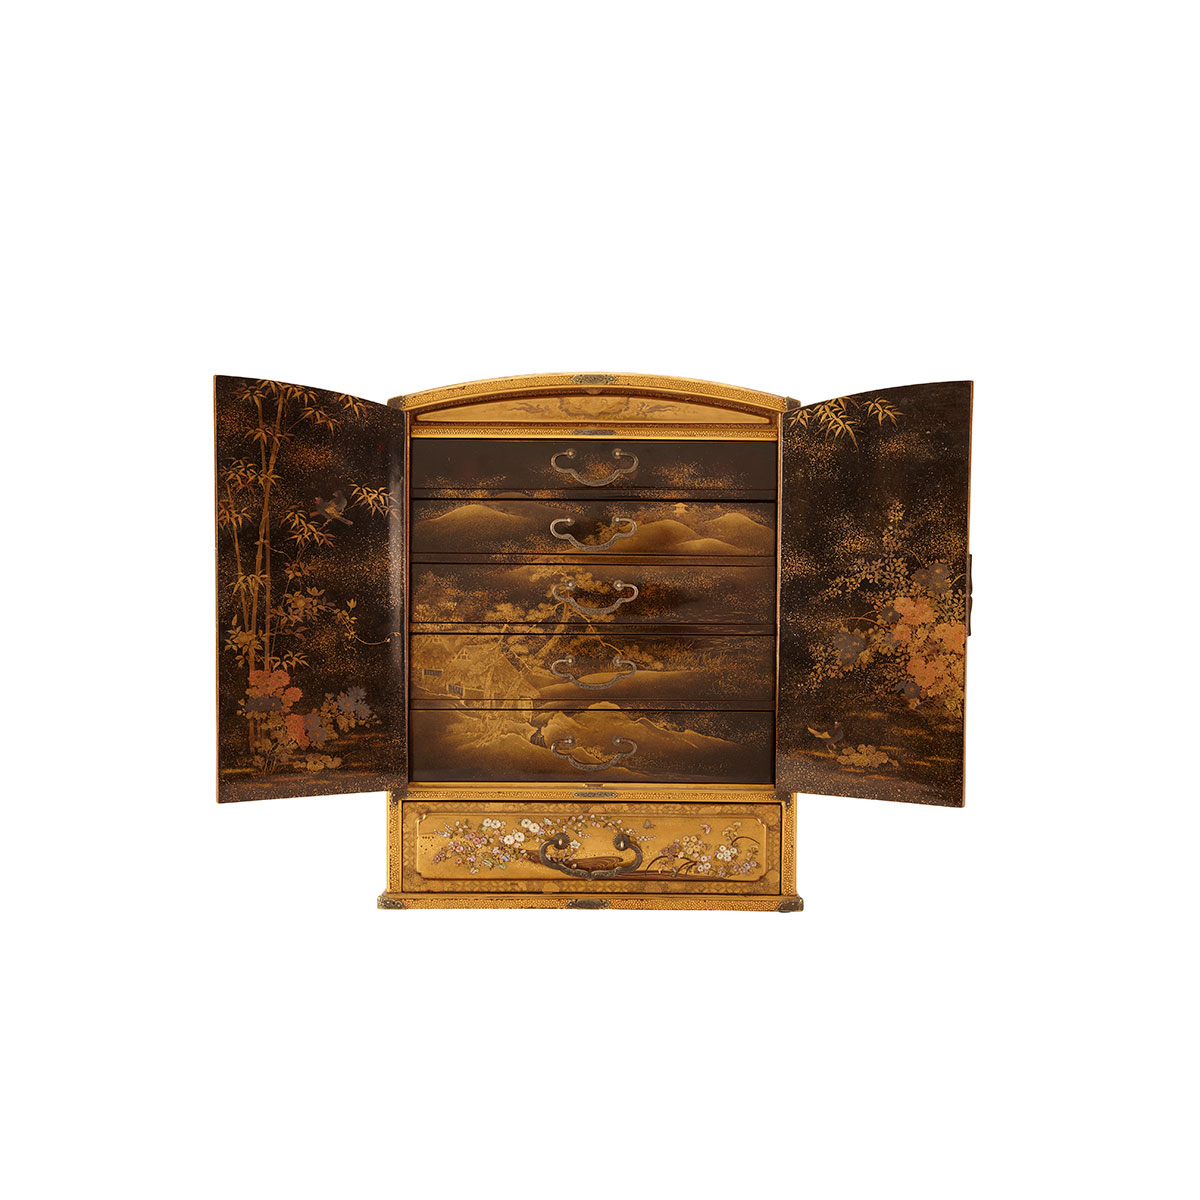 Magnificent Lacquer and Inlay Cabinet 176bde